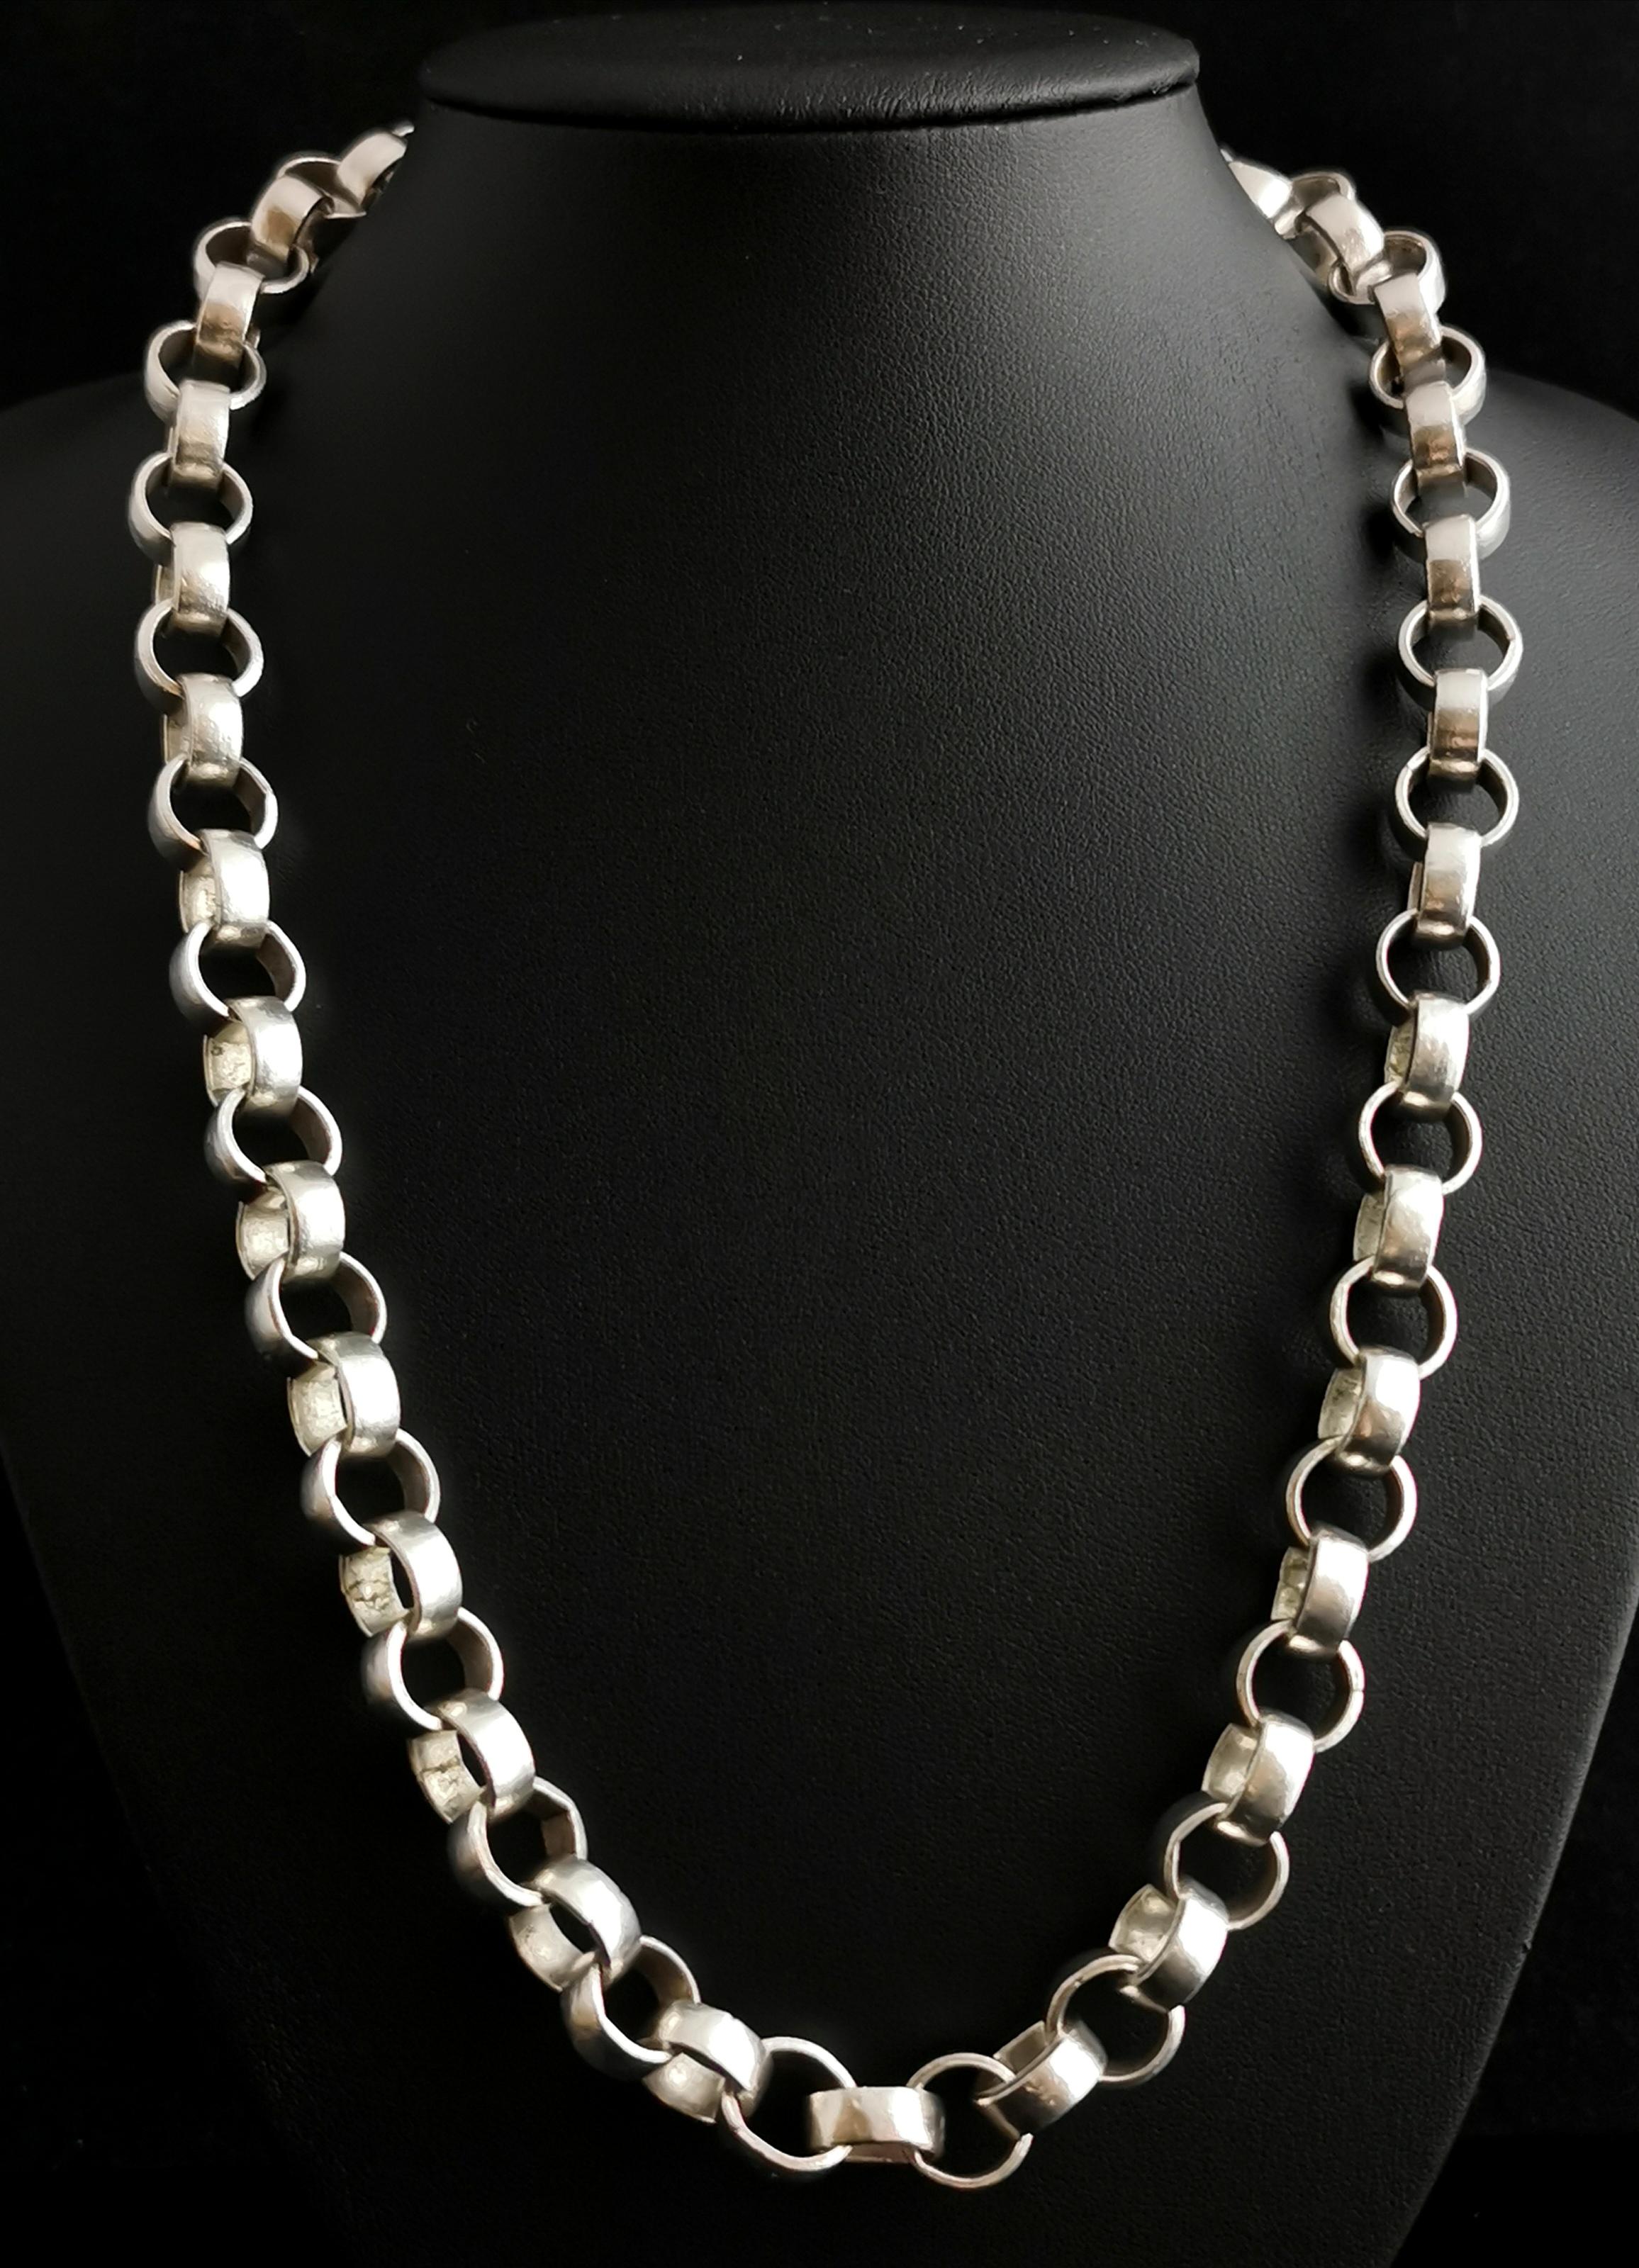 A gorgeous vintage chunky and heavyweight fine silver rolo link chain necklace.

This is a definite statement piece and is a chain that you certainly know you are wearing, the bright and vibrant tone of fine silver paired with the lovely chunky rolo